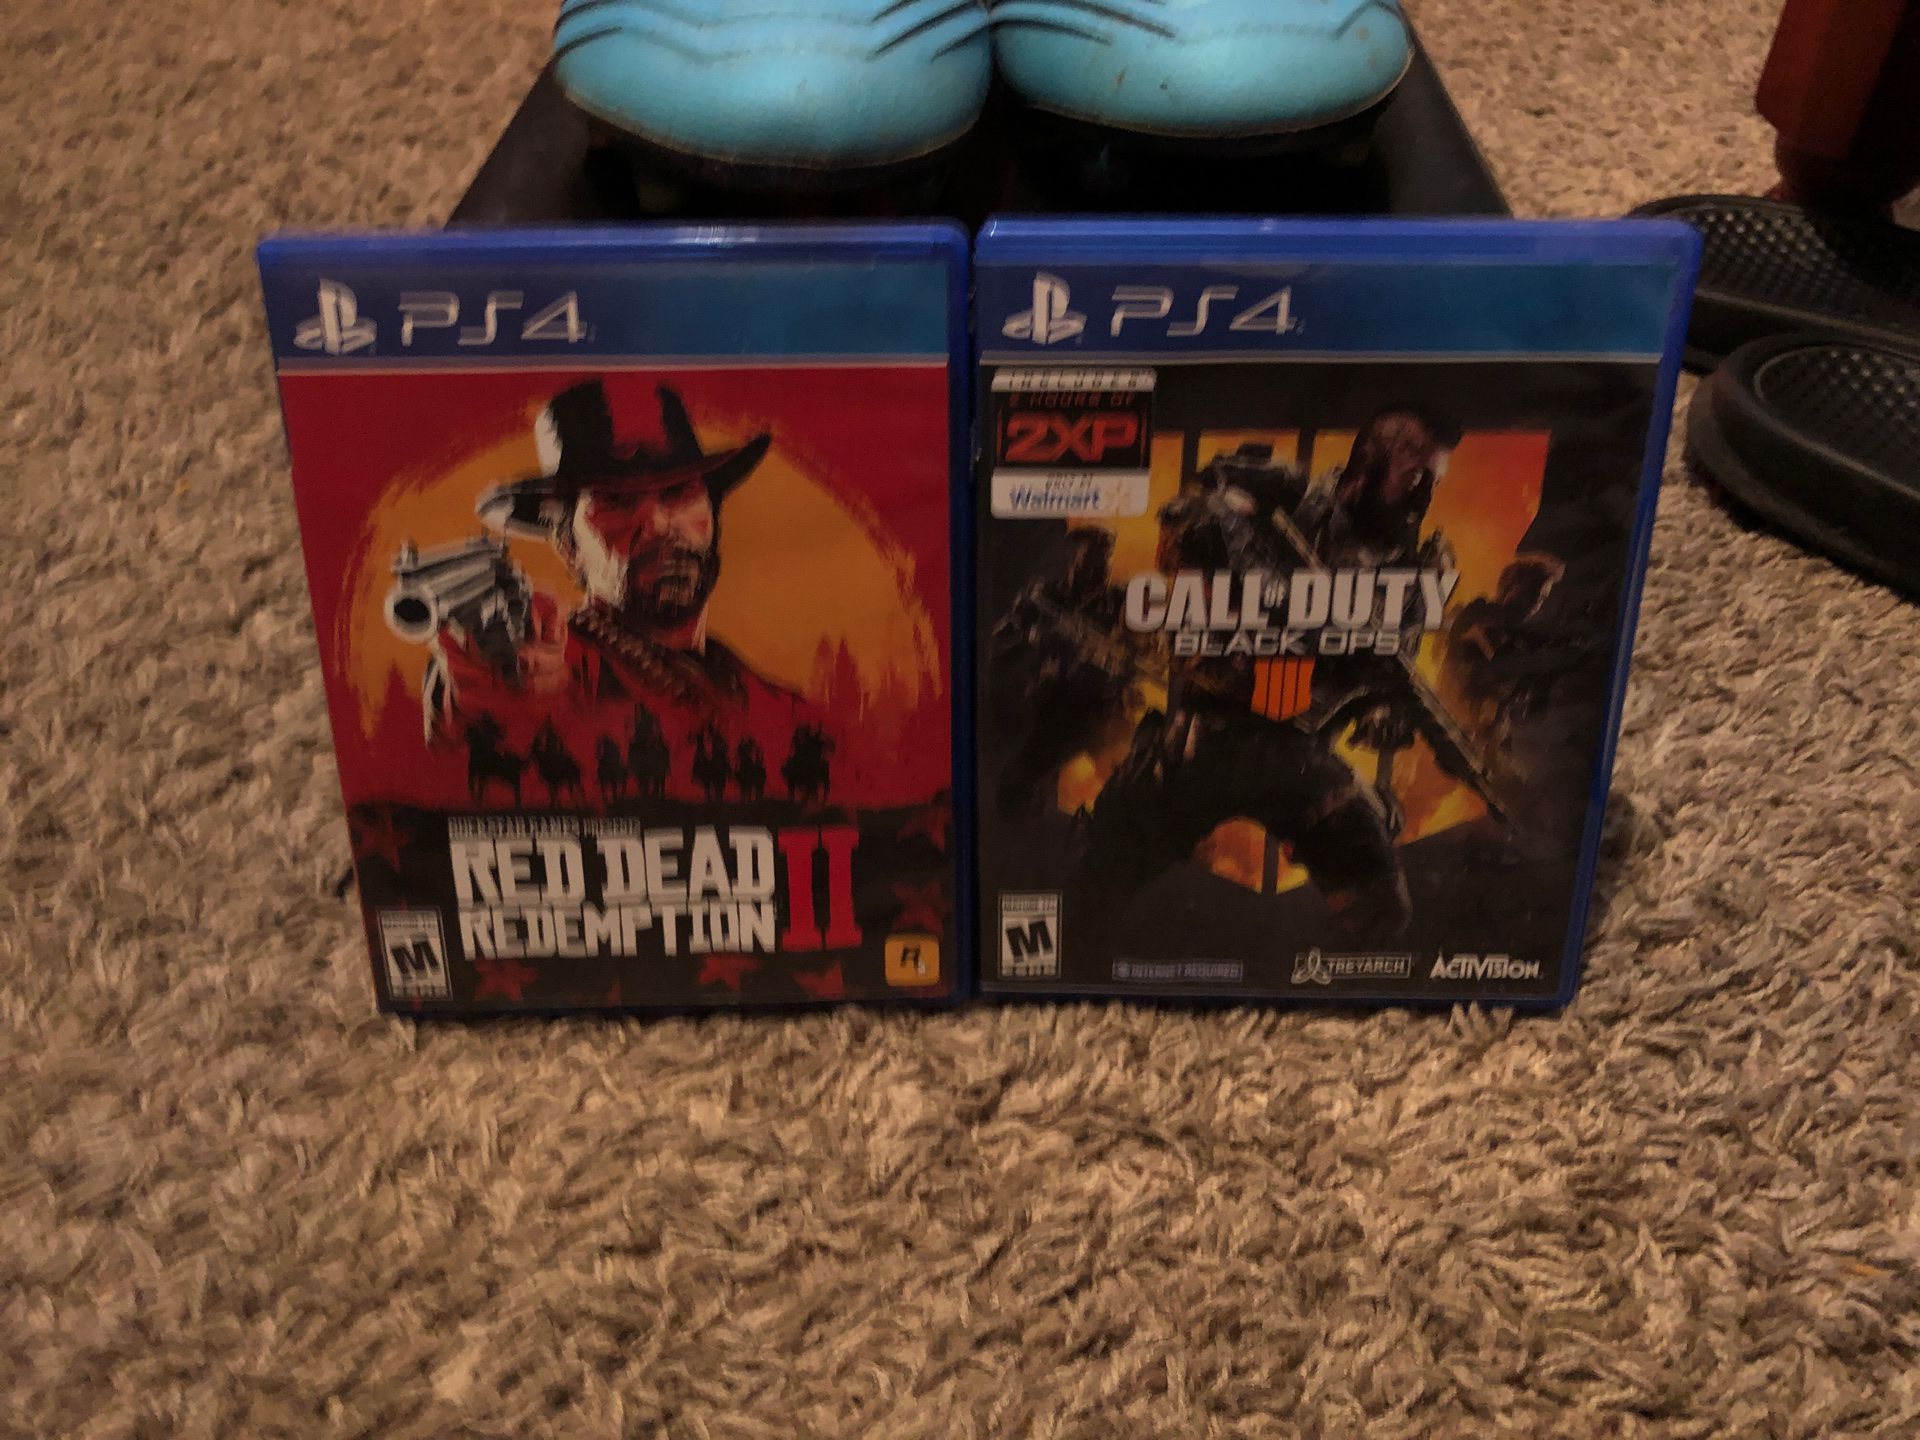 Red dead redemption 2 for PS4 and bo4 for PS4